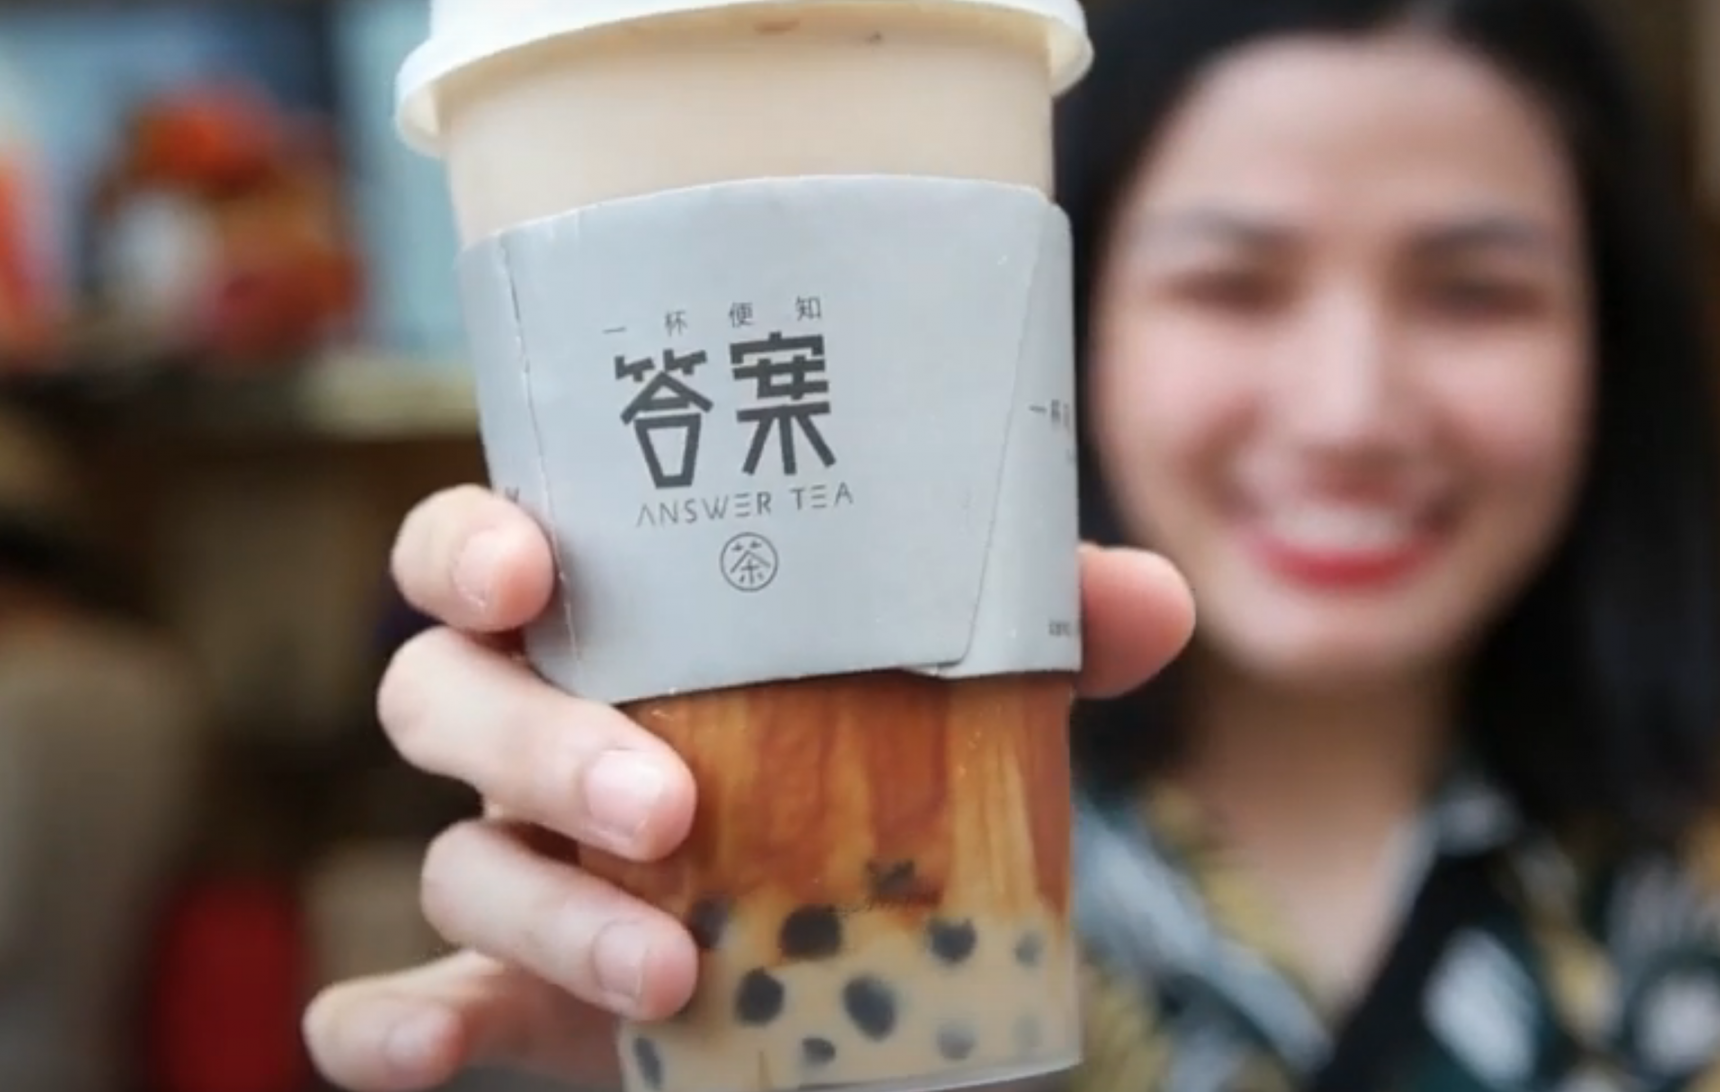 A.I. Tells Your Fortune with Bubble Tea Order